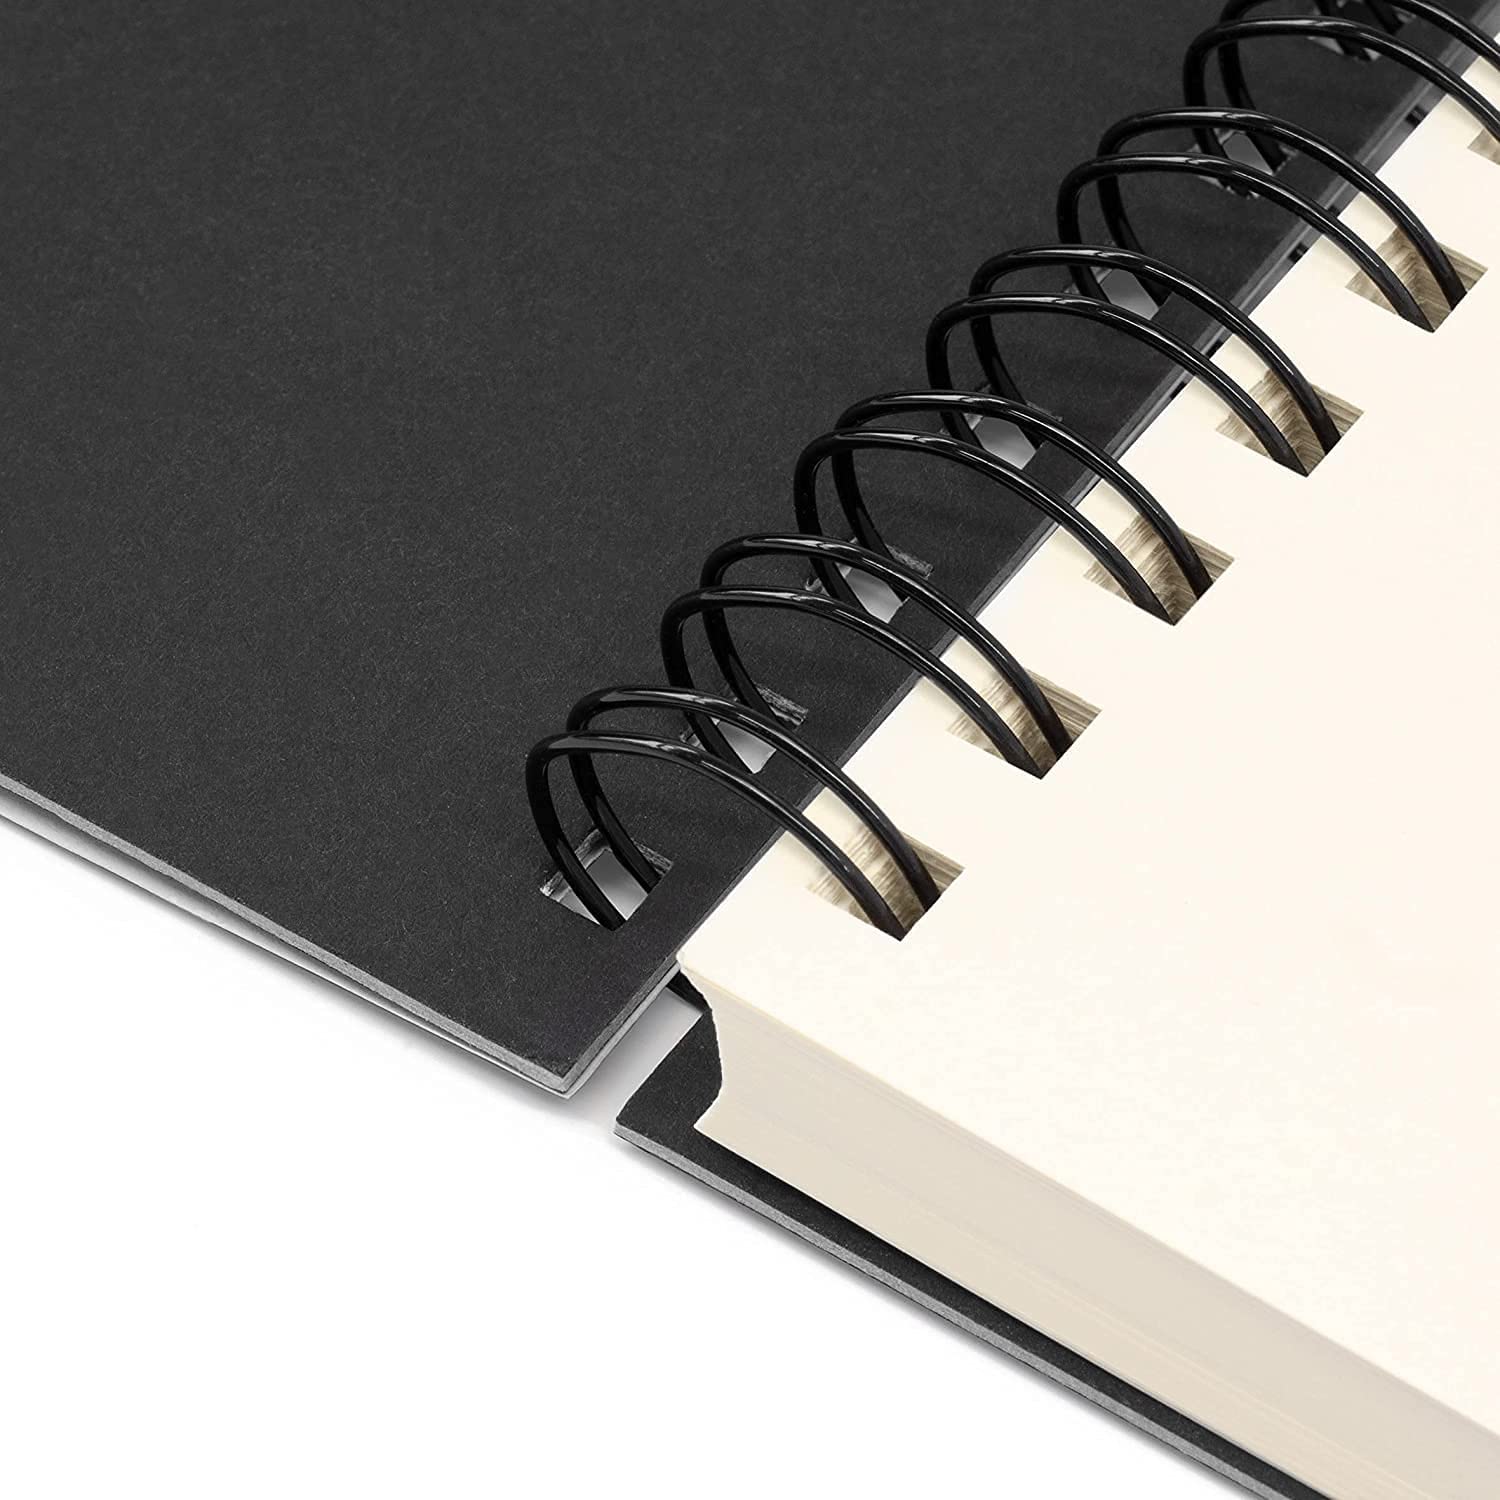 A5 Classic Ivory Hardback Spiral Bound Sketchbook – Ashton and Wright